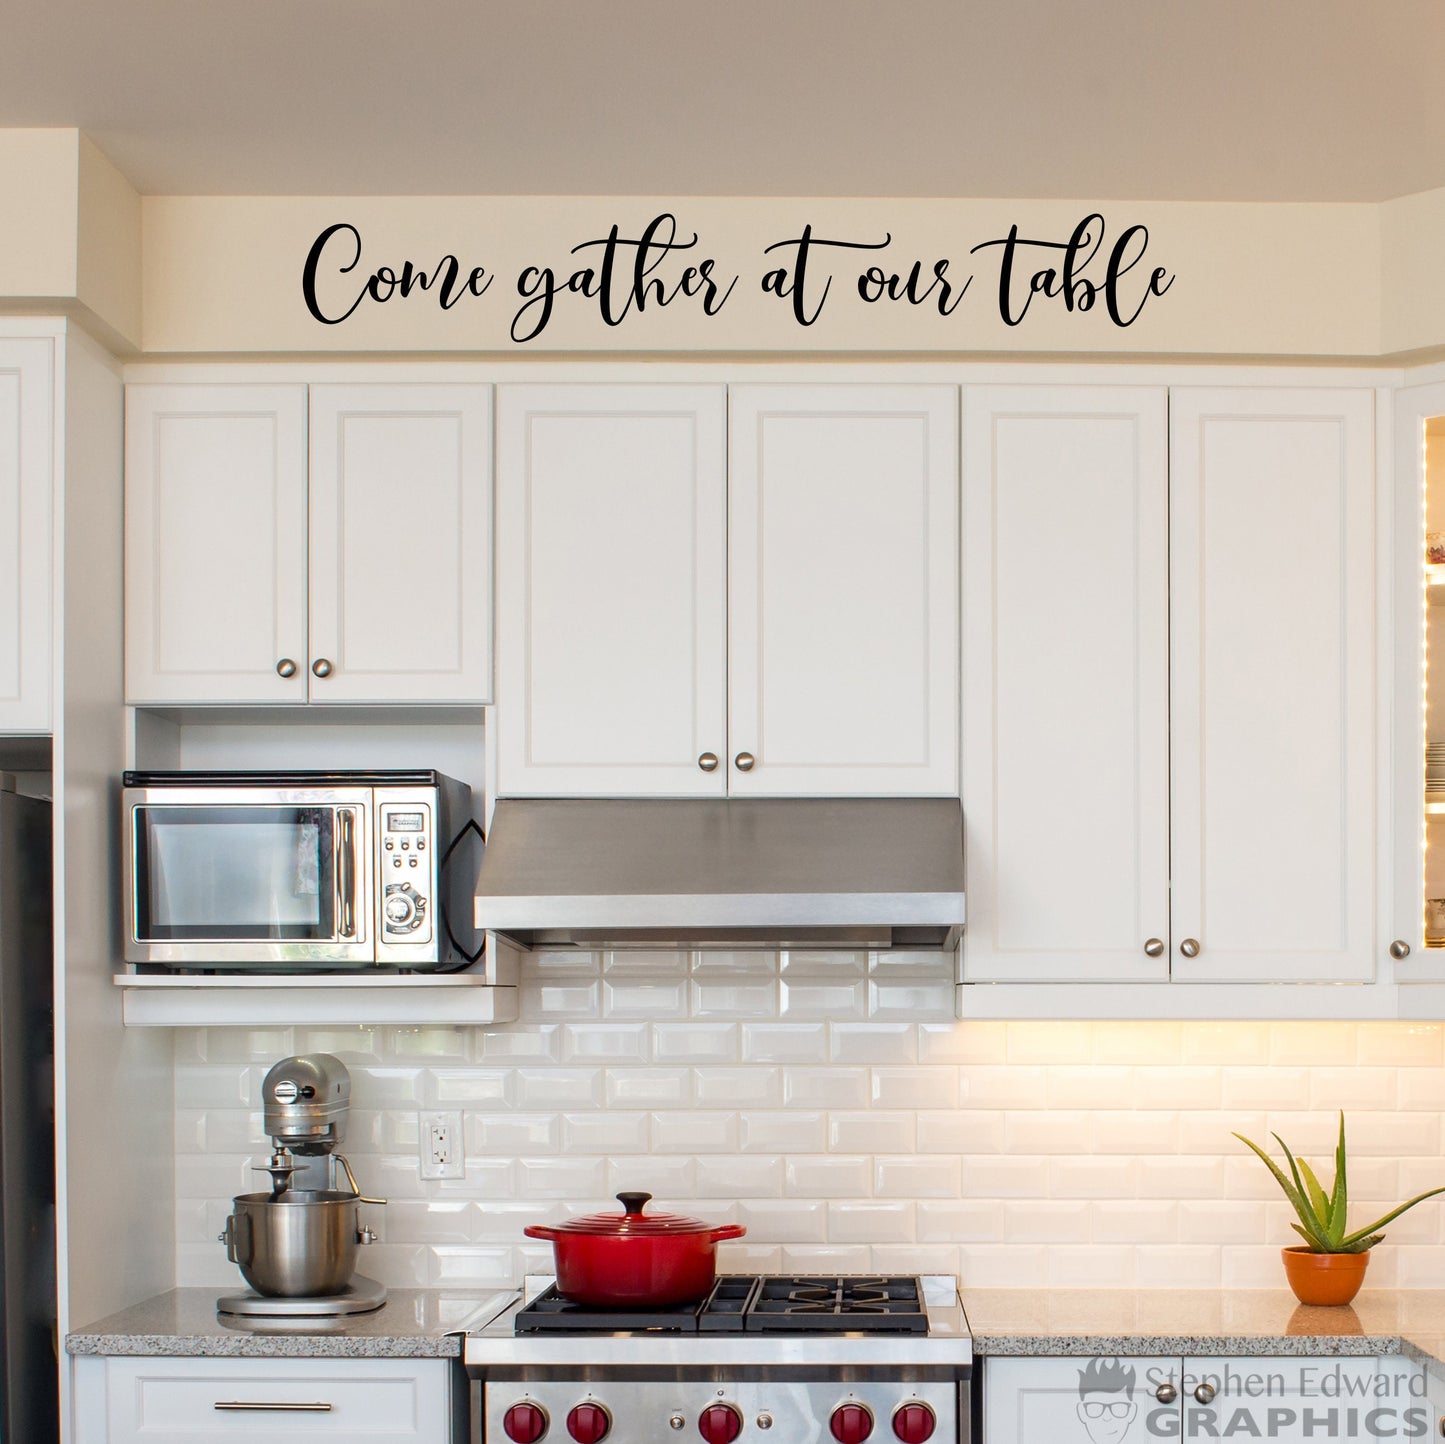 Come Gather at our Table Decal - Kitchen Wall Art Decor